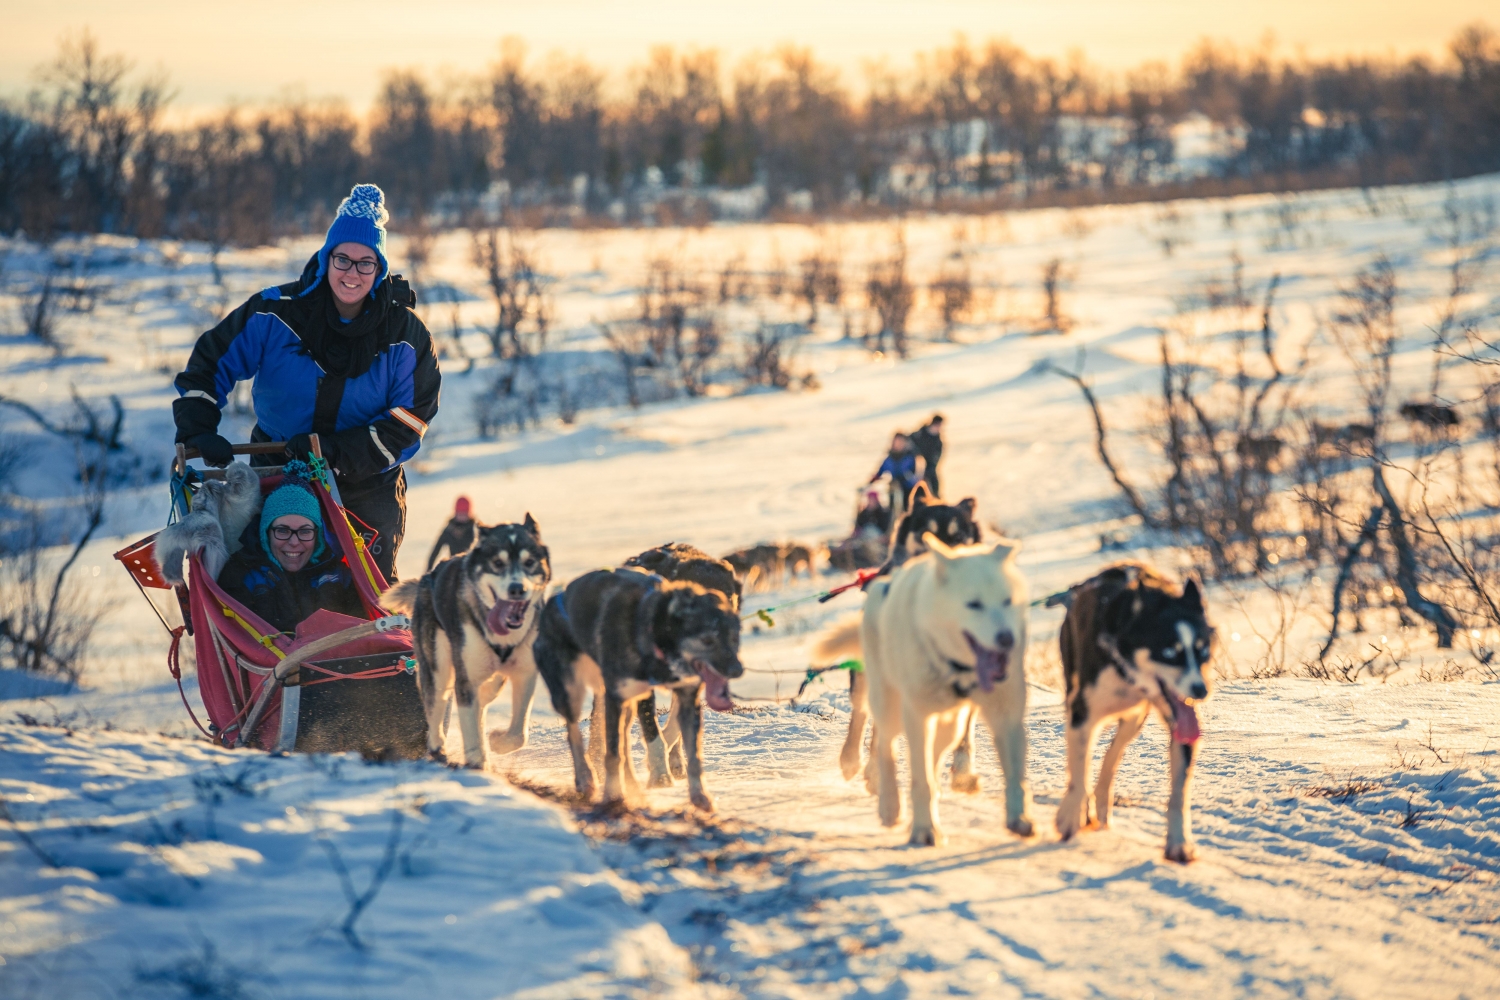 Dog sledding in winter landscape with the sun shining on the snow